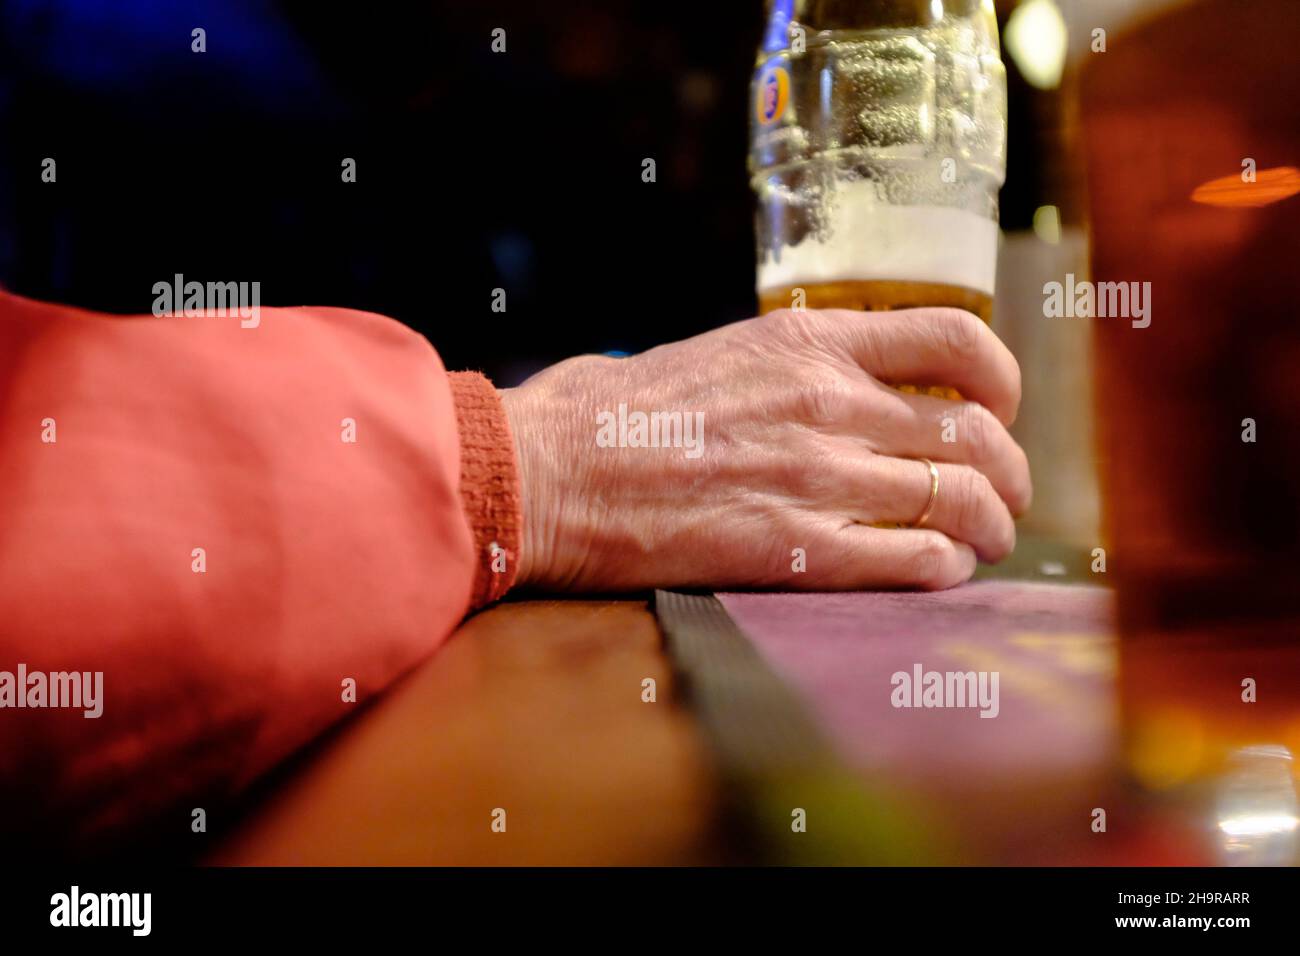 hand,holding,pint,beer,glass,old,england,uk, Stock Photo